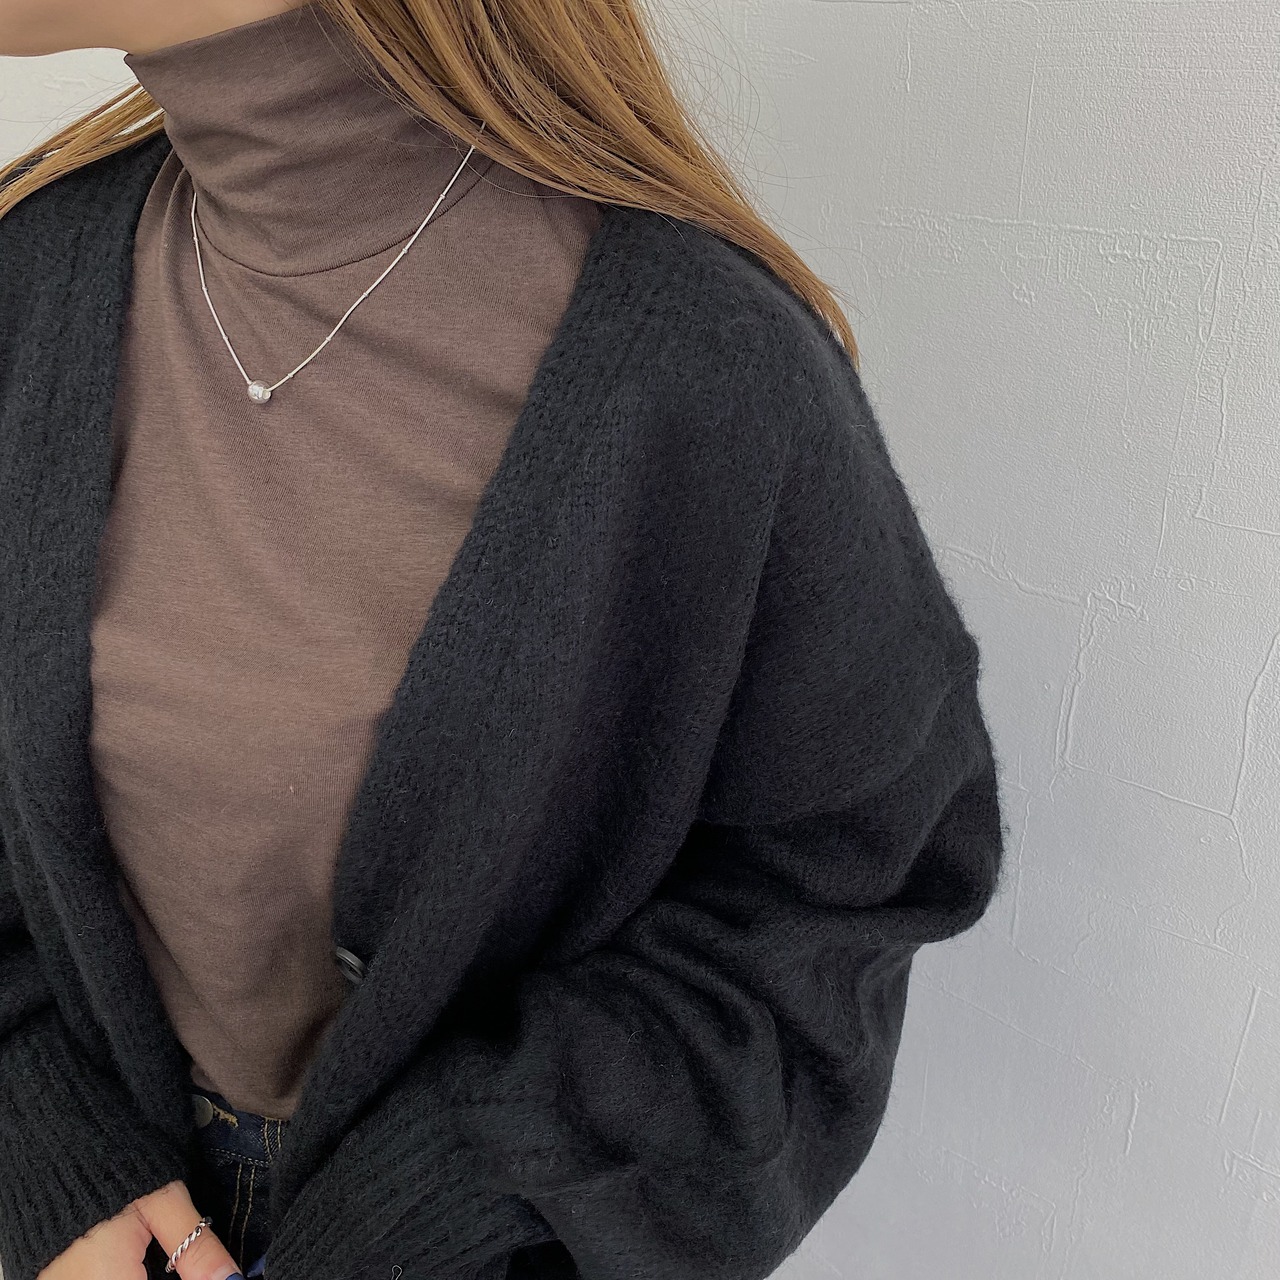 6color sheer wool knit T